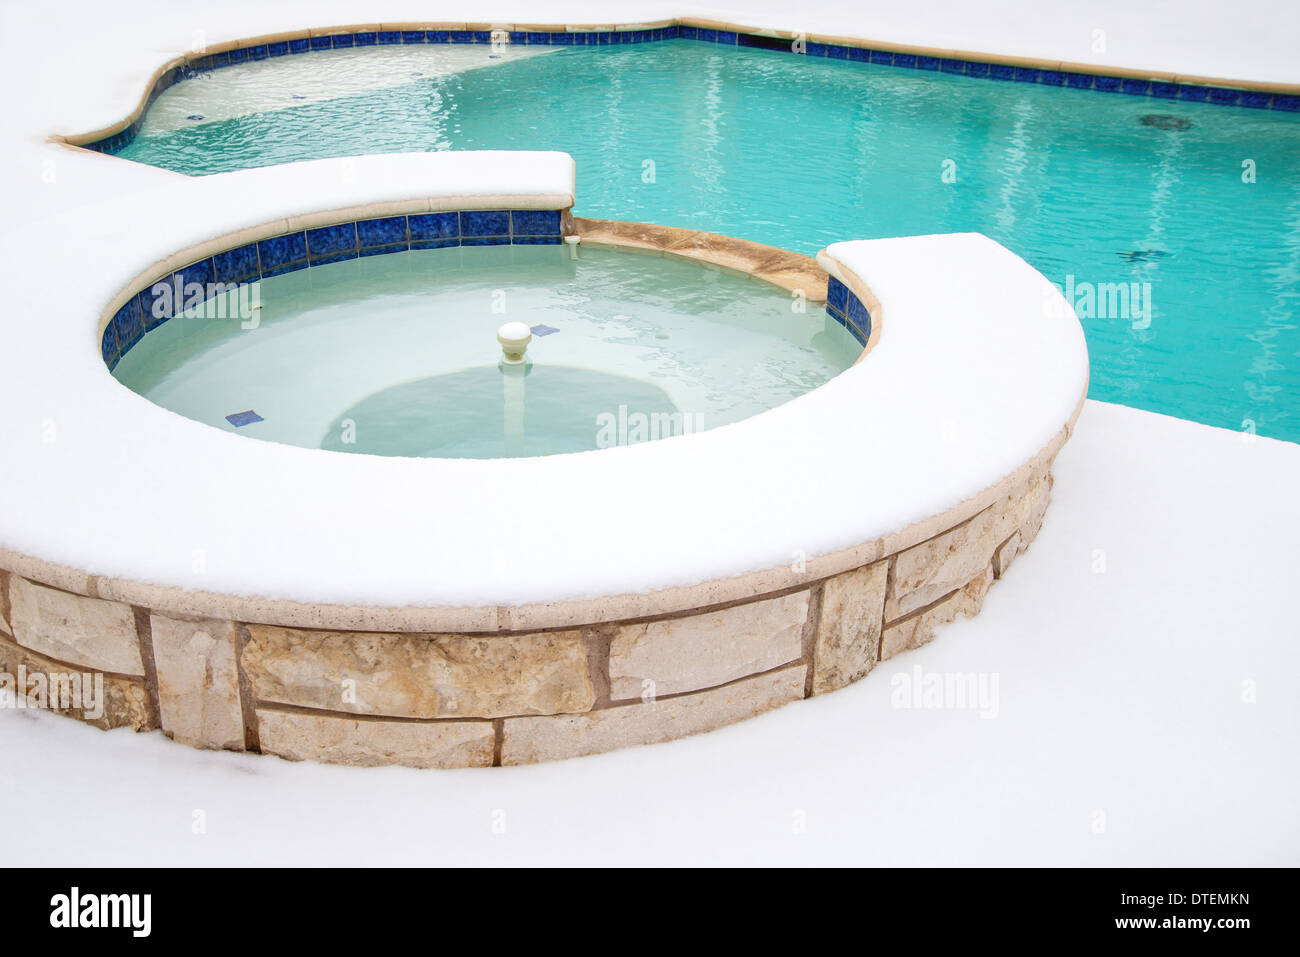 Outdoor hot tub or spa by swimming pool surrounded by snow in the winter Stock Photo